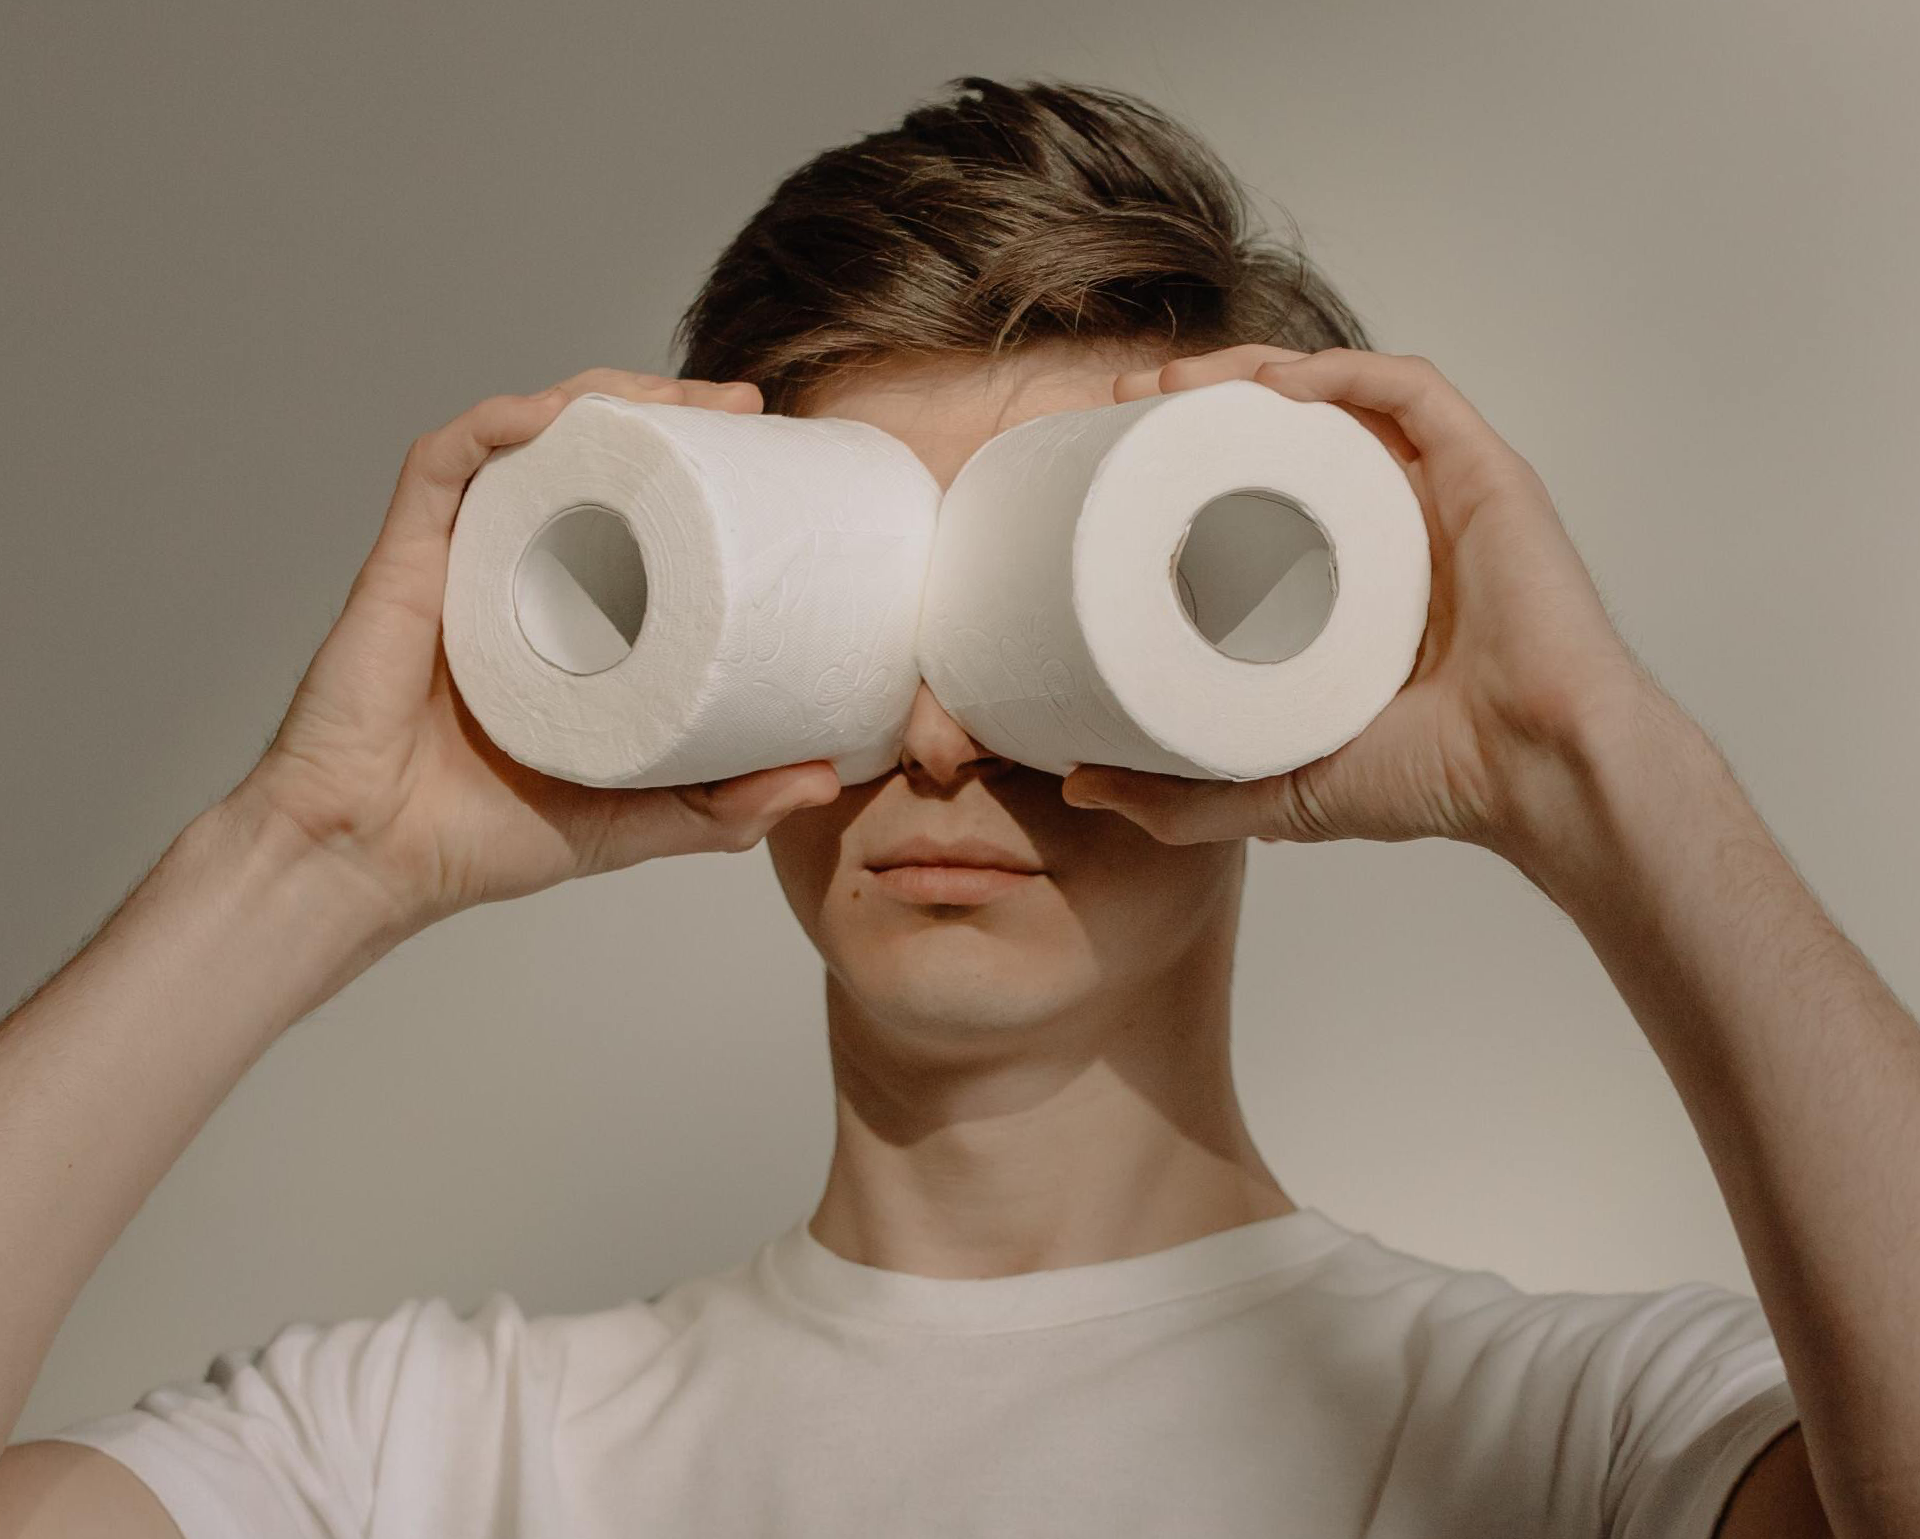 Man holding toilet paper rolls in front of his eyes